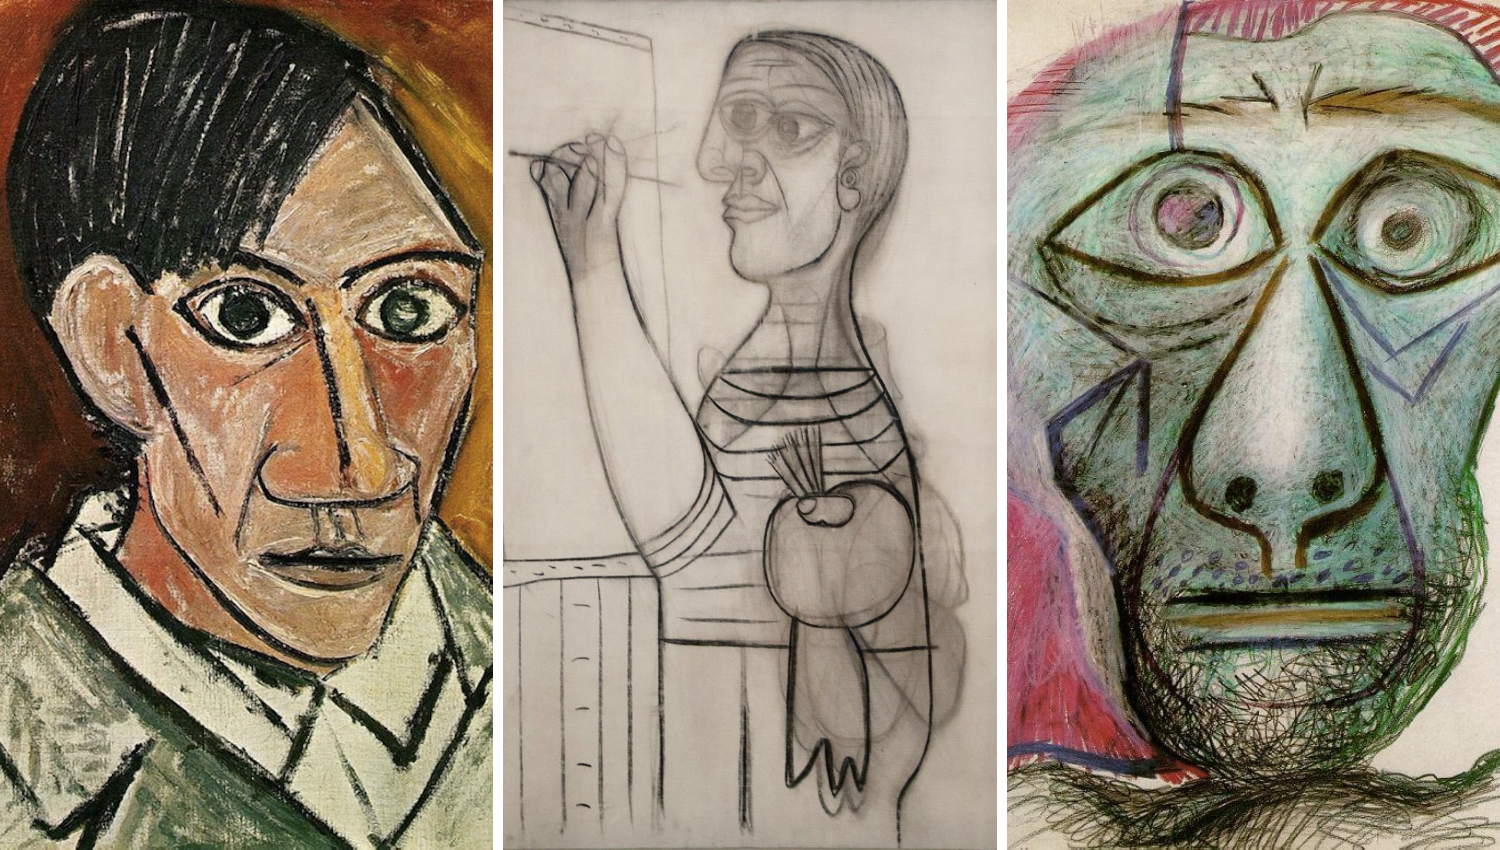 Pablo Picasso's self portraits through the years